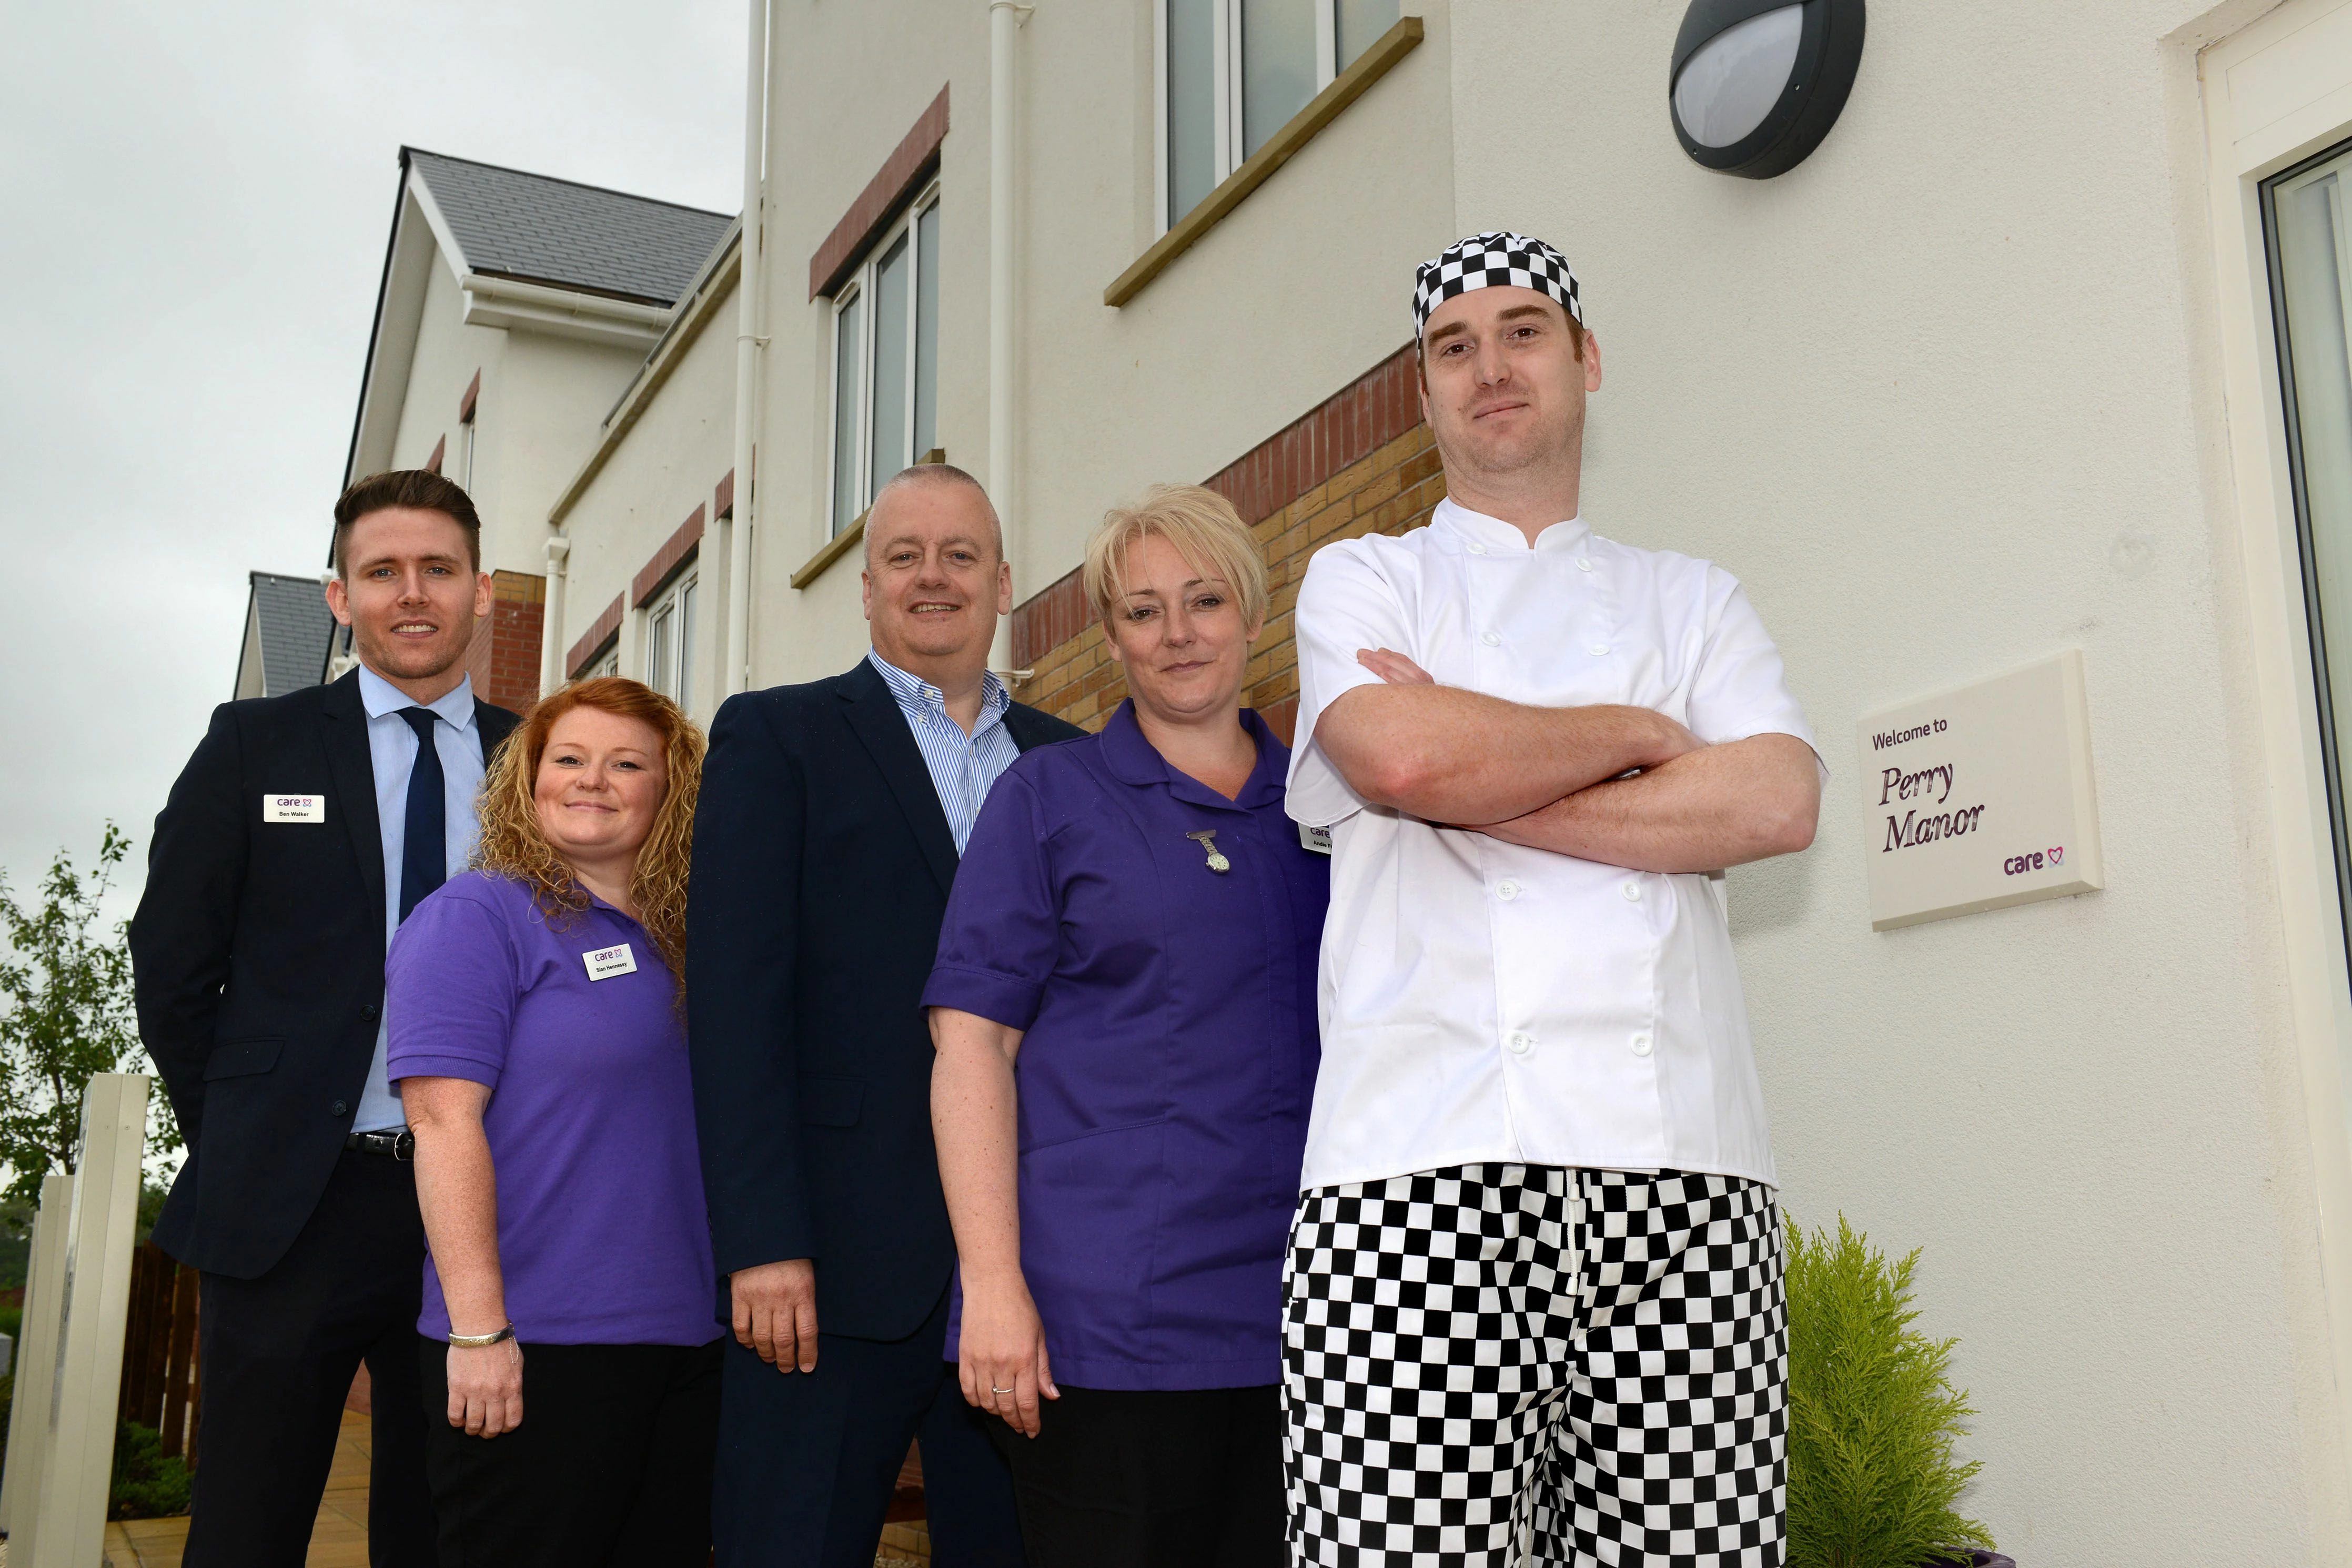 New Team at Perry Manor Care Home, Worcester